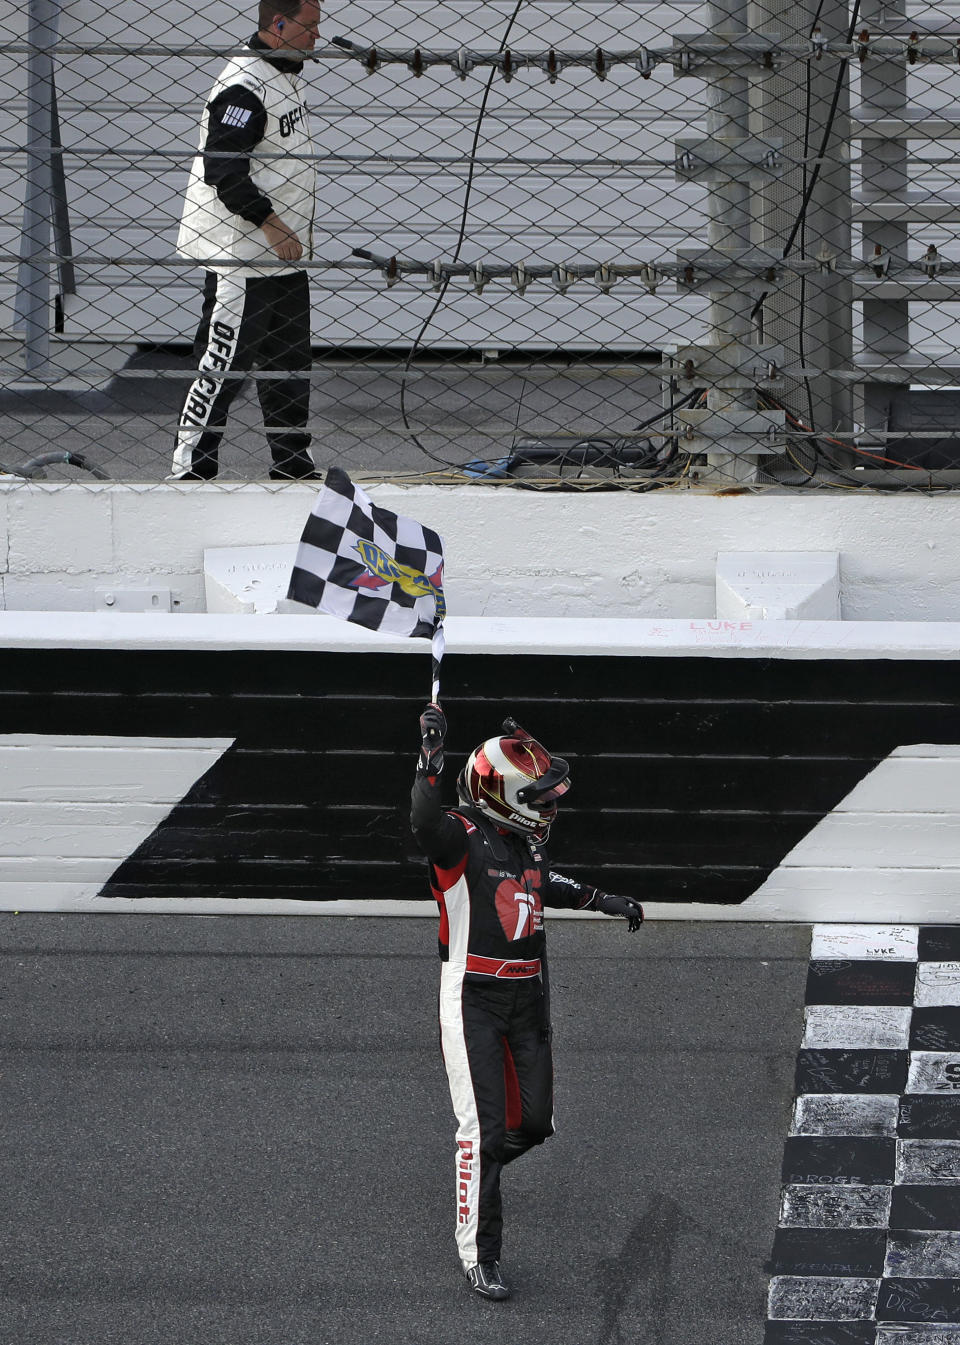 Michael Annett waves the checkered flag after getting it from a race official at the end of the NASCAR Xfinity auto race Saturday, Feb. 16, 2019, at Daytona International Speedway in Daytona Beach, Fla. Annett won the race. (AP Photo/Chris O'Meara)